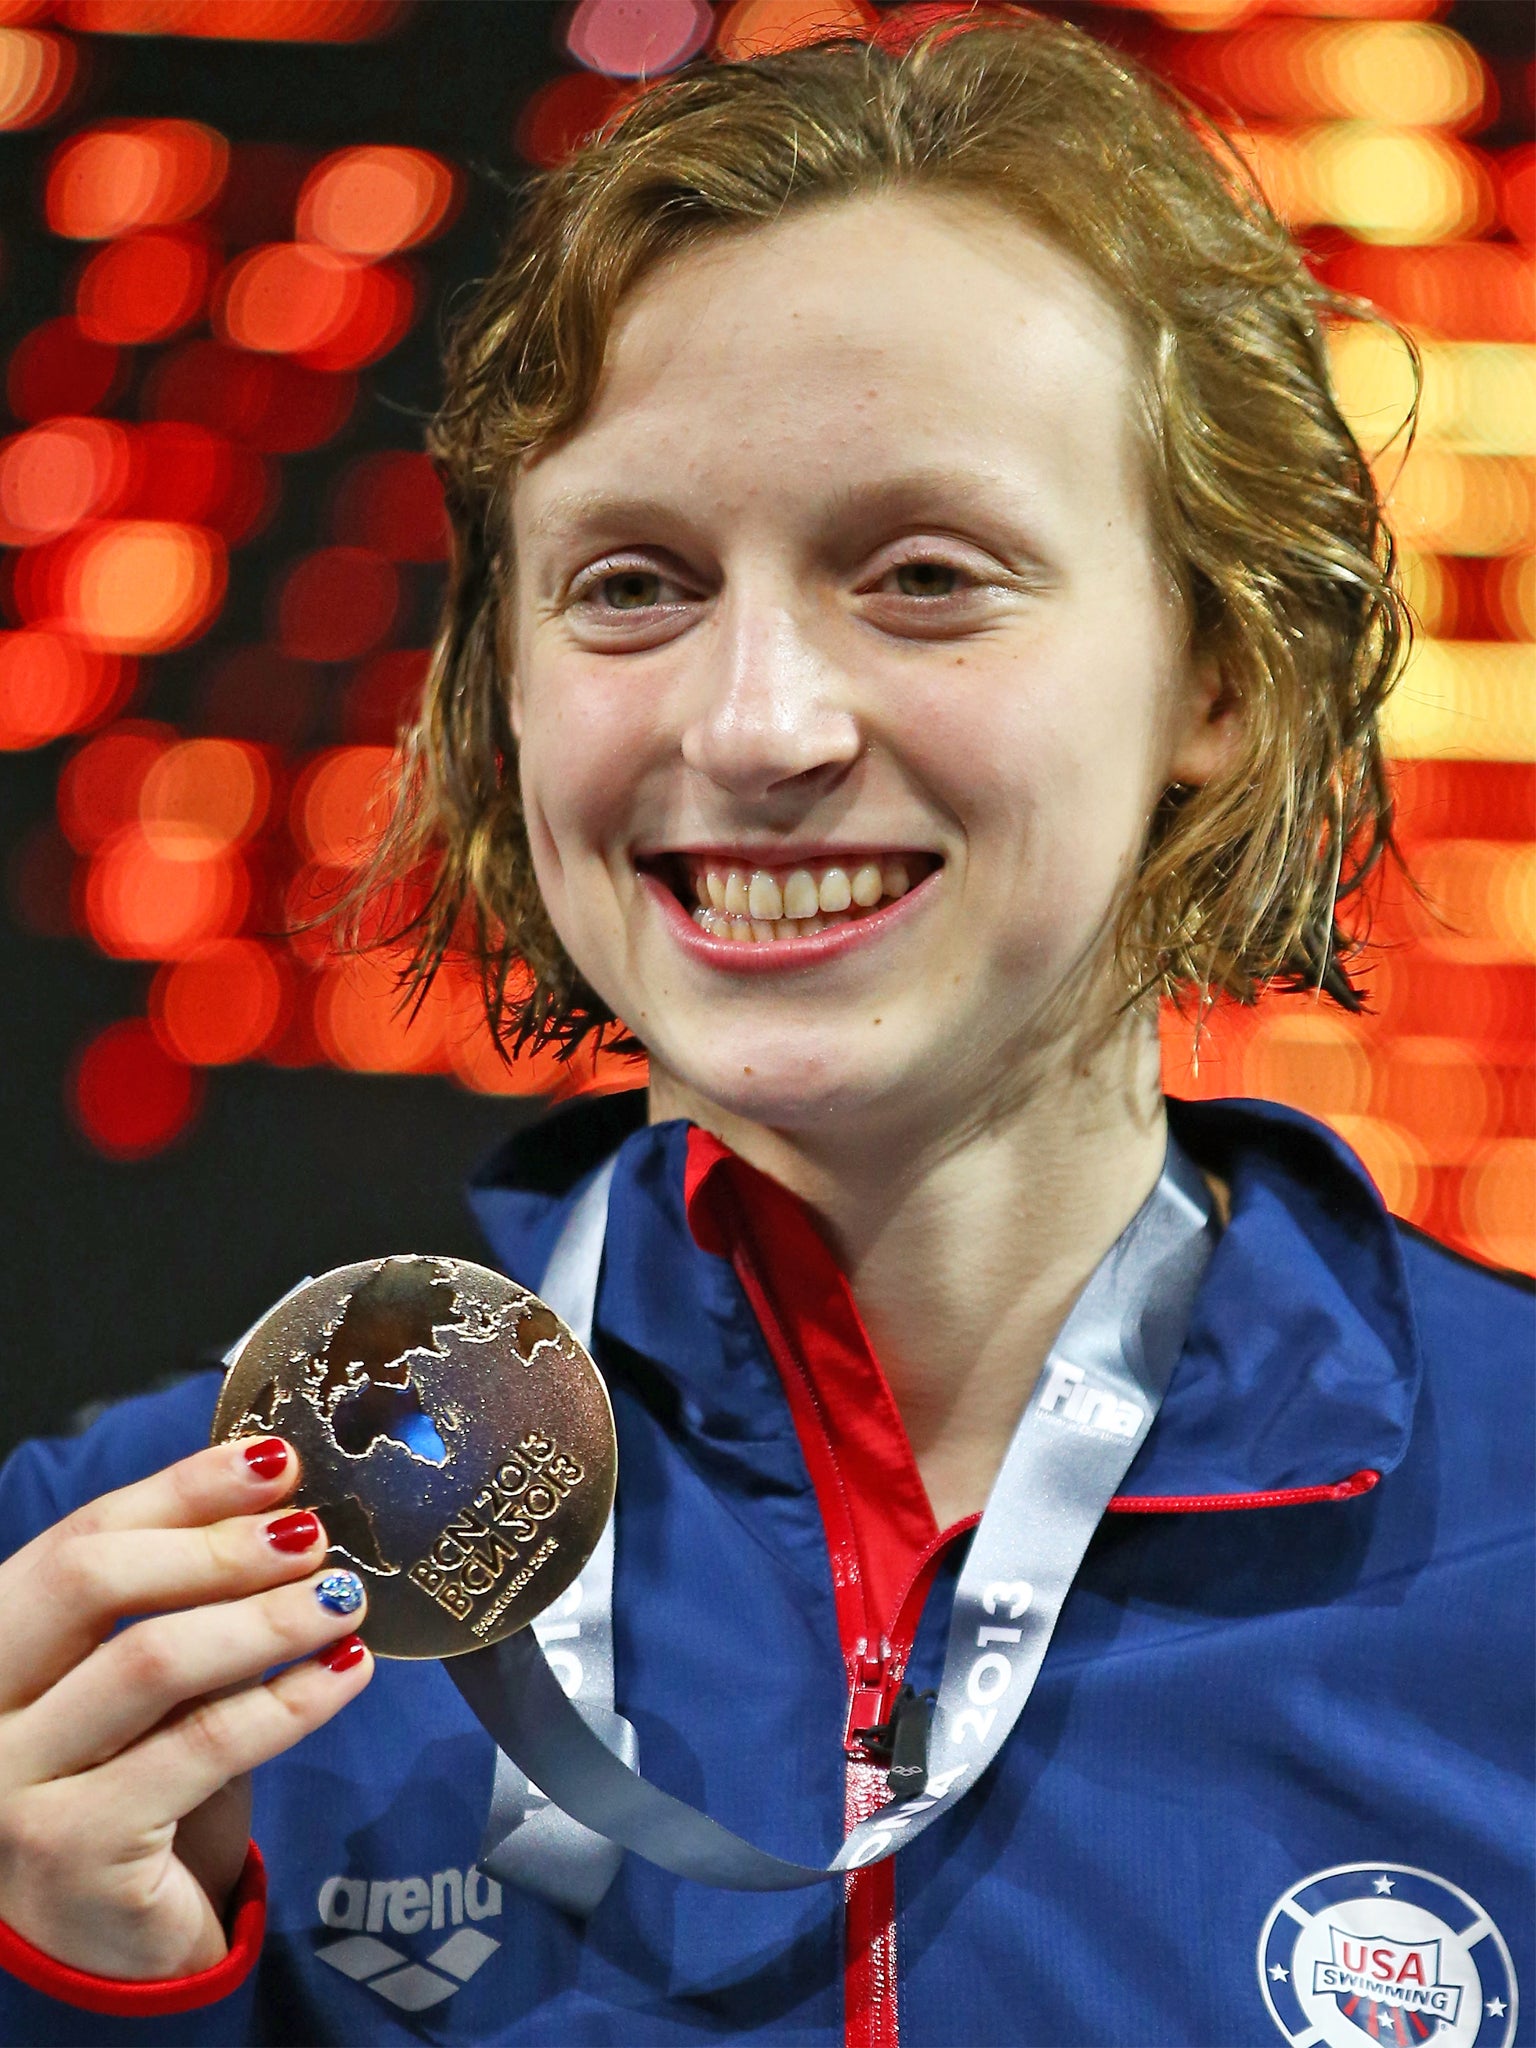 16-year-old Katie Ledecky with her second gold medal of the Championships